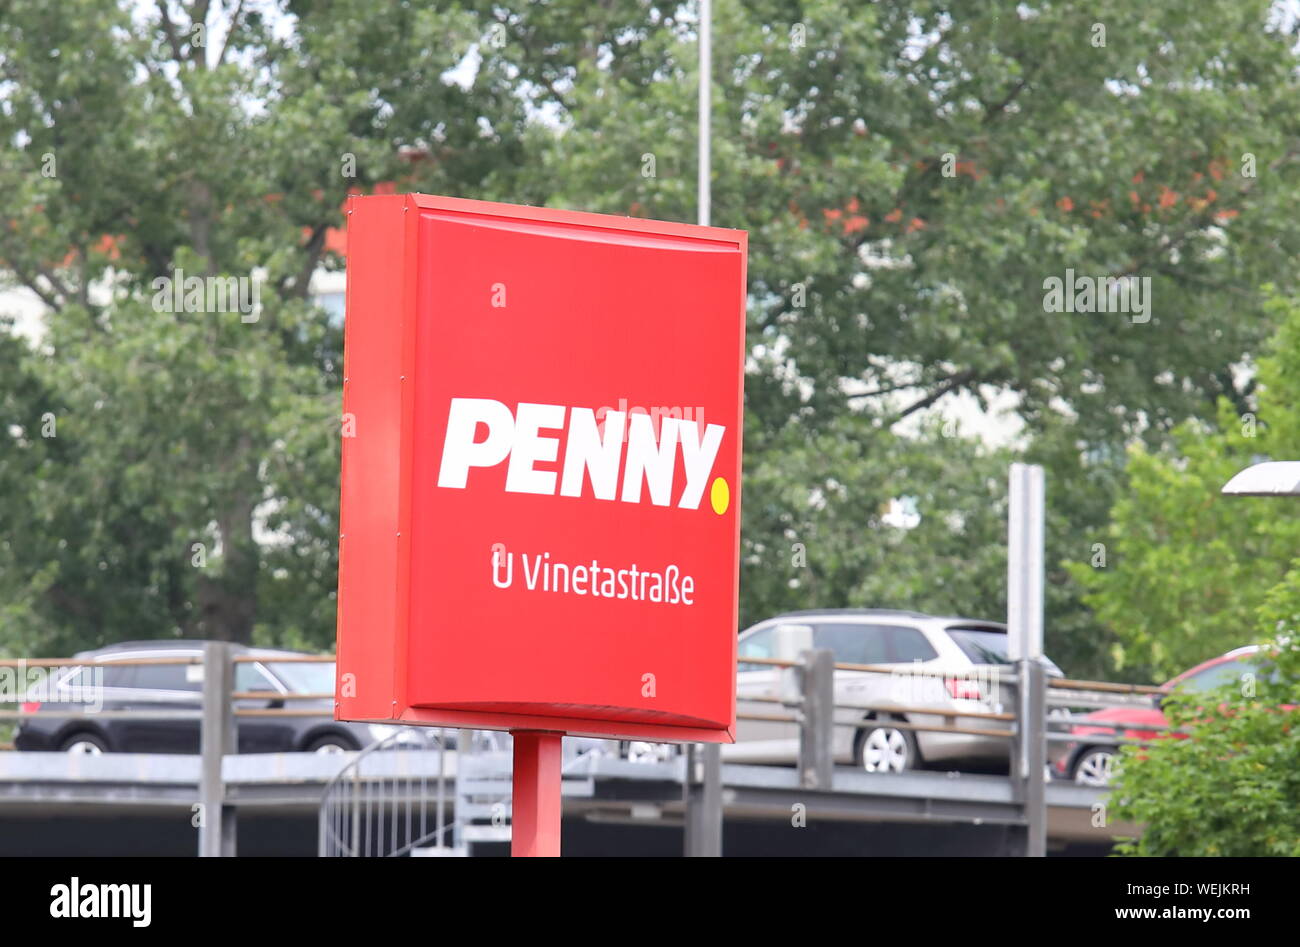 Allemagne supermarché discount Penny Photo Stock - Alamy